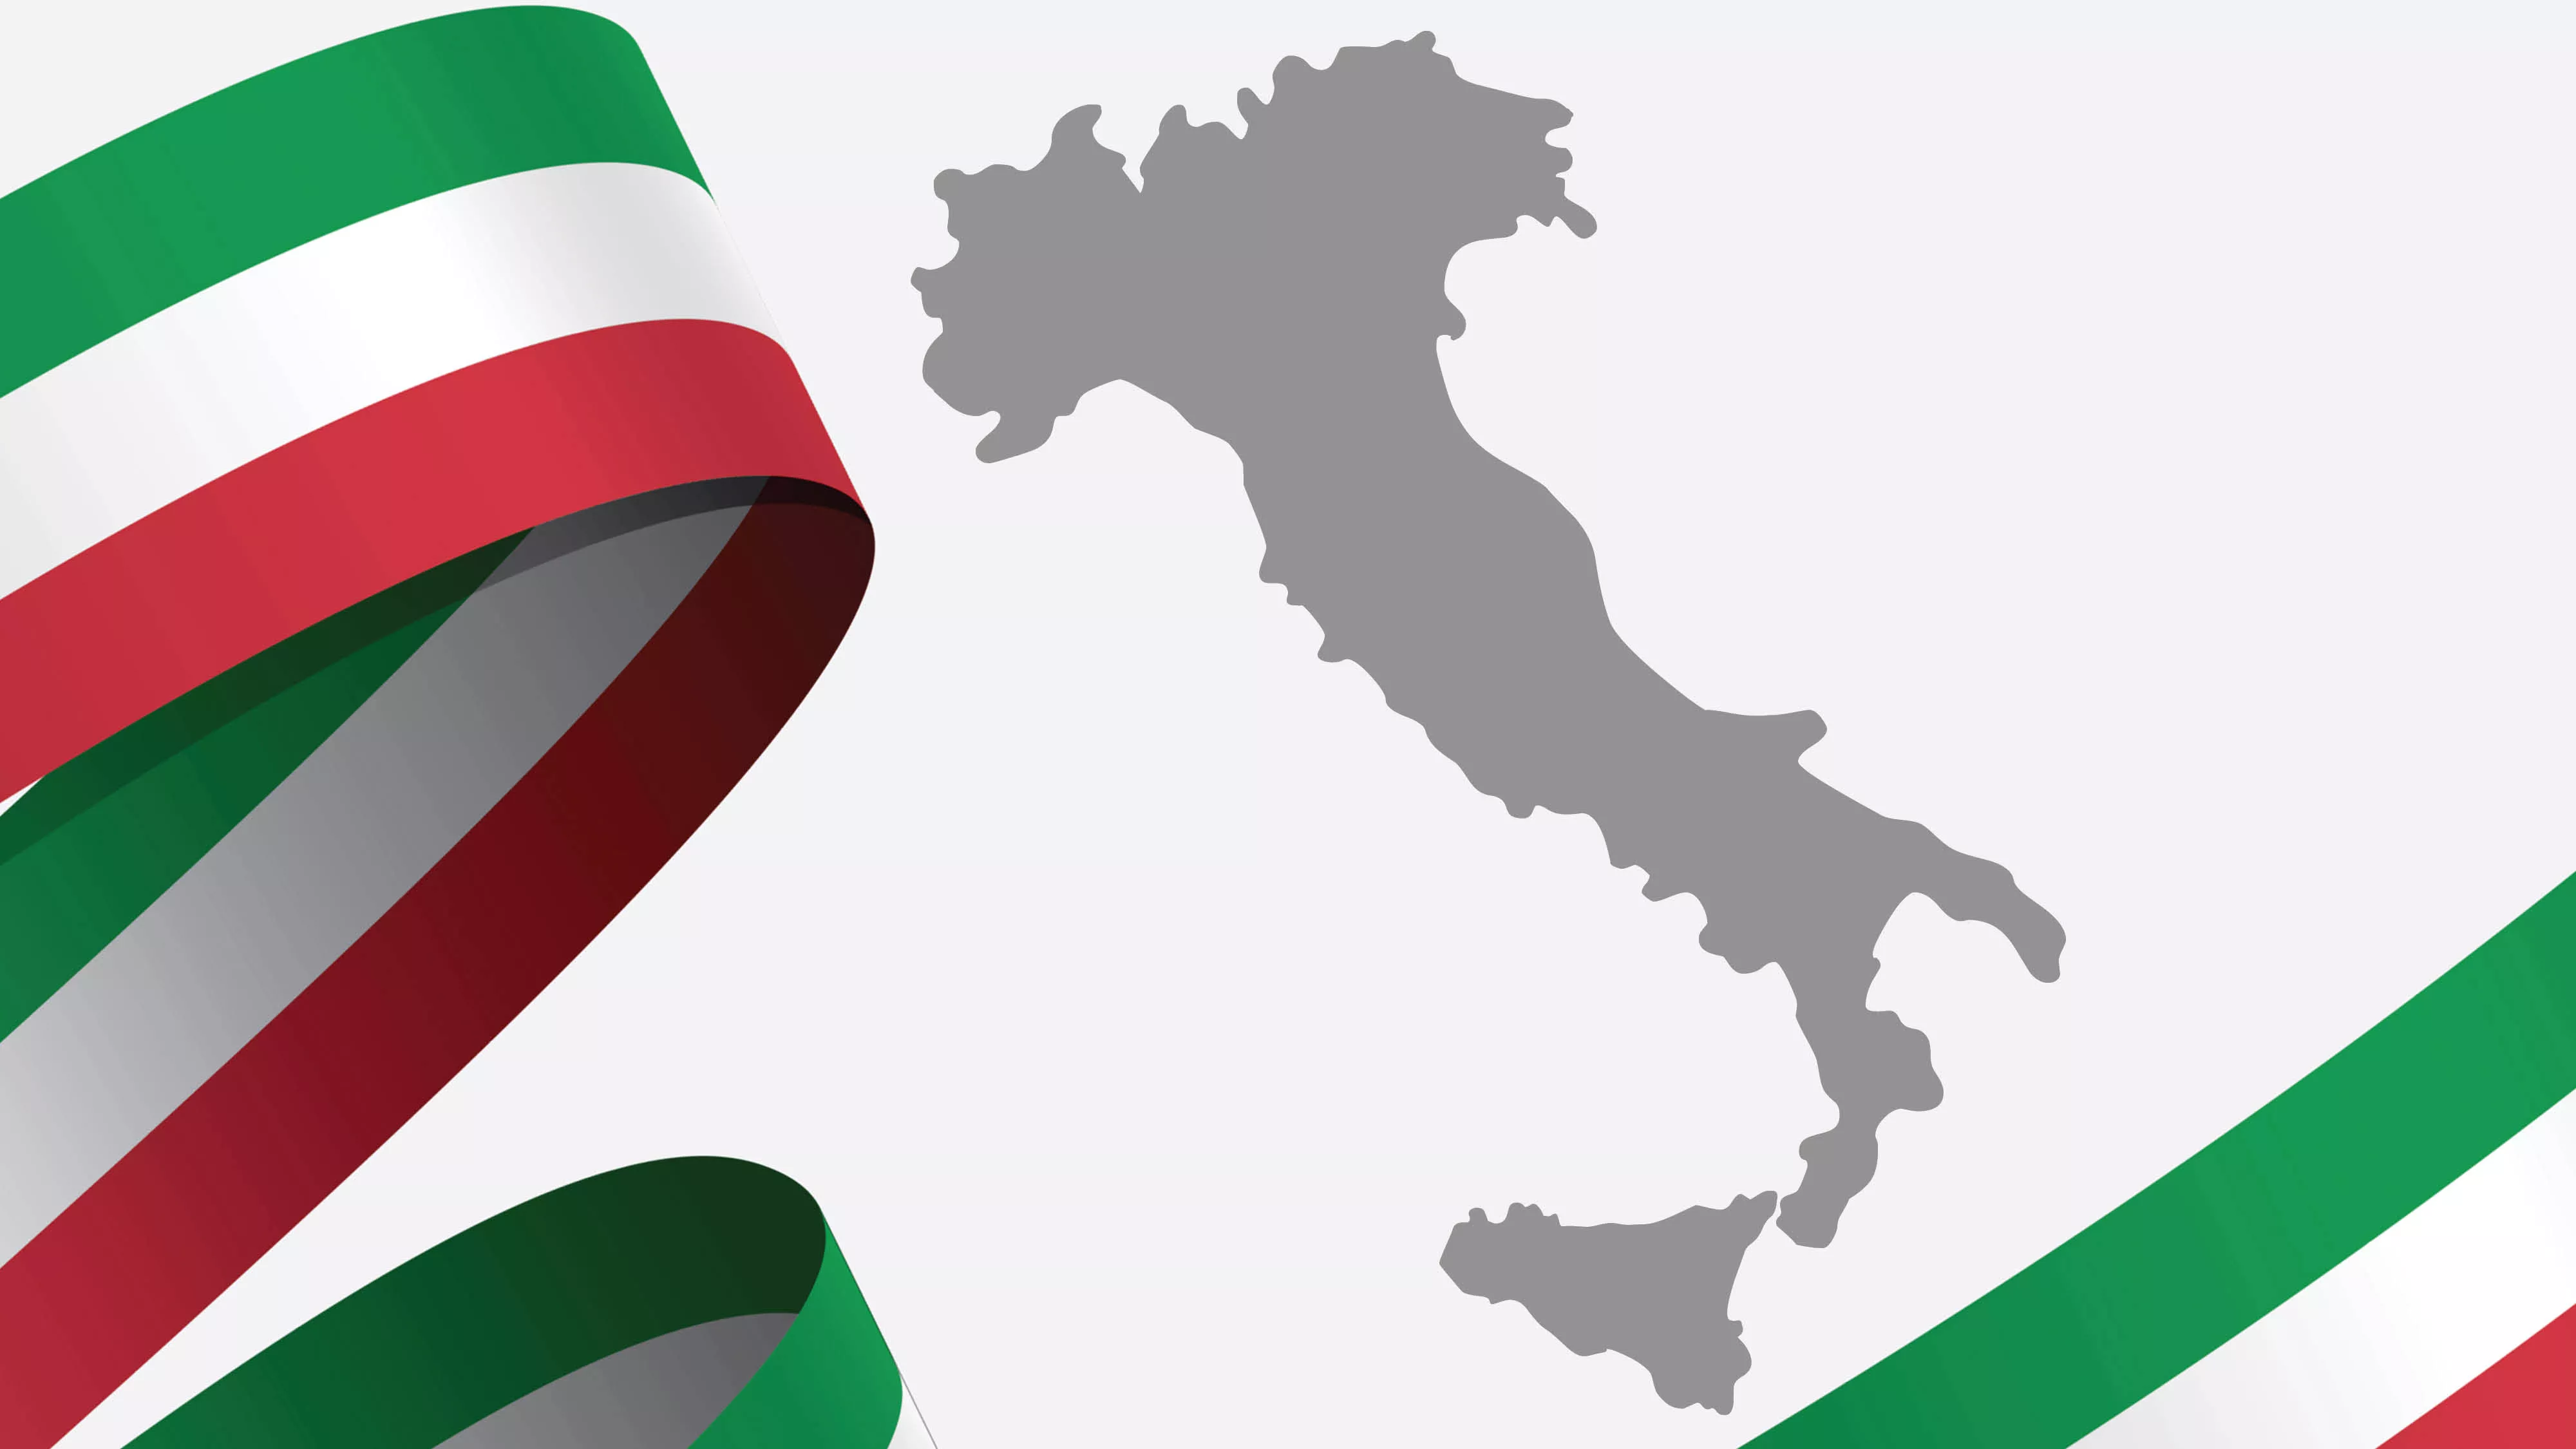 A photo of Italy with a ribbon in the colours of the Italian flag